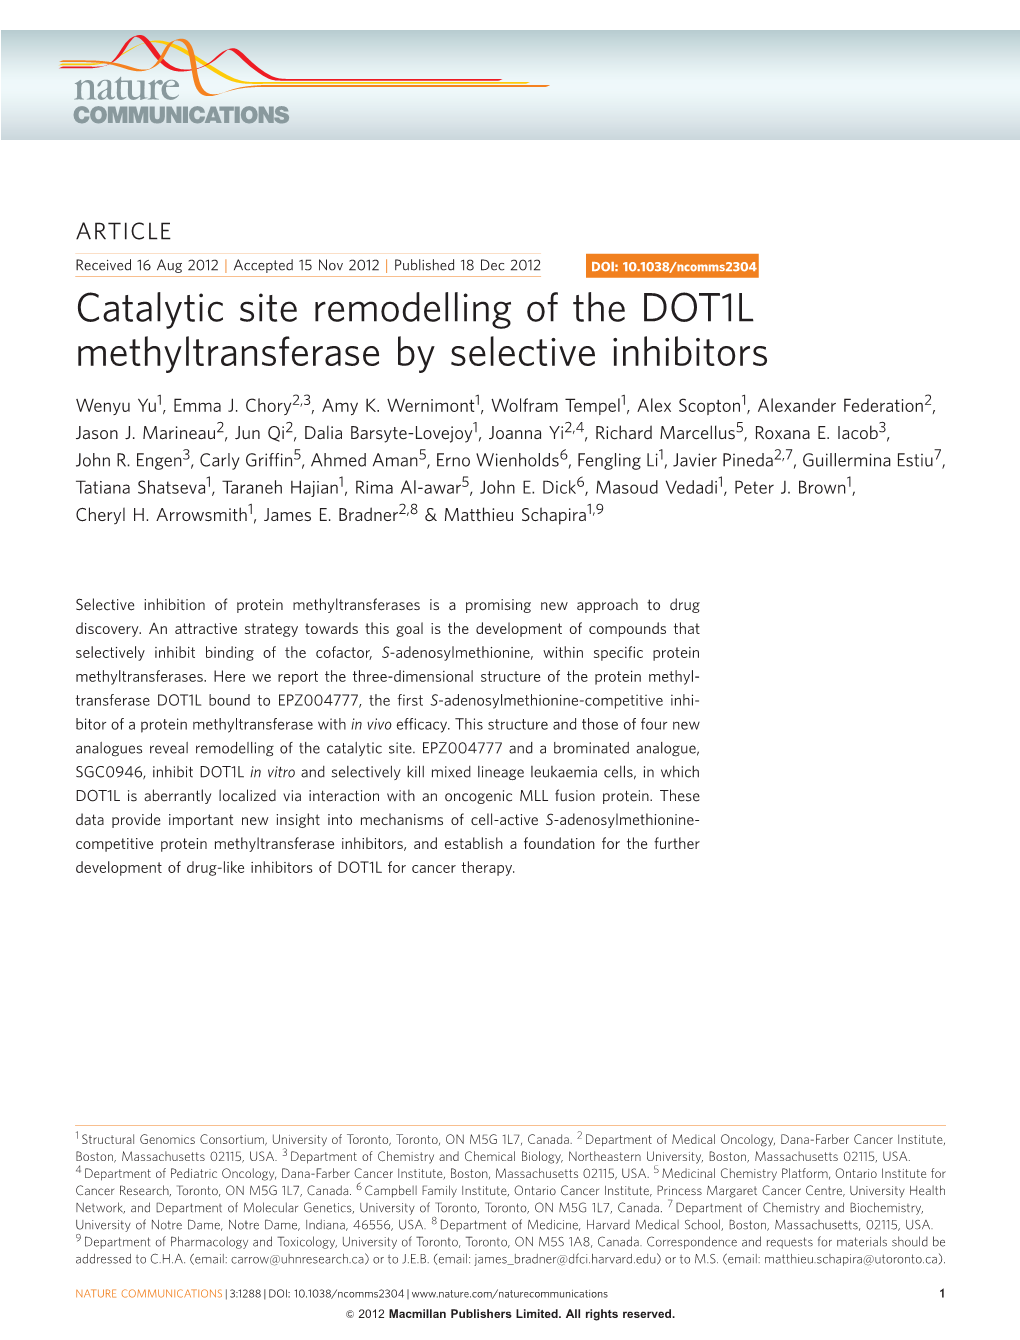 Catalytic Site Remodelling of the DOT1L Methyltransferase by Selective Inhibitors